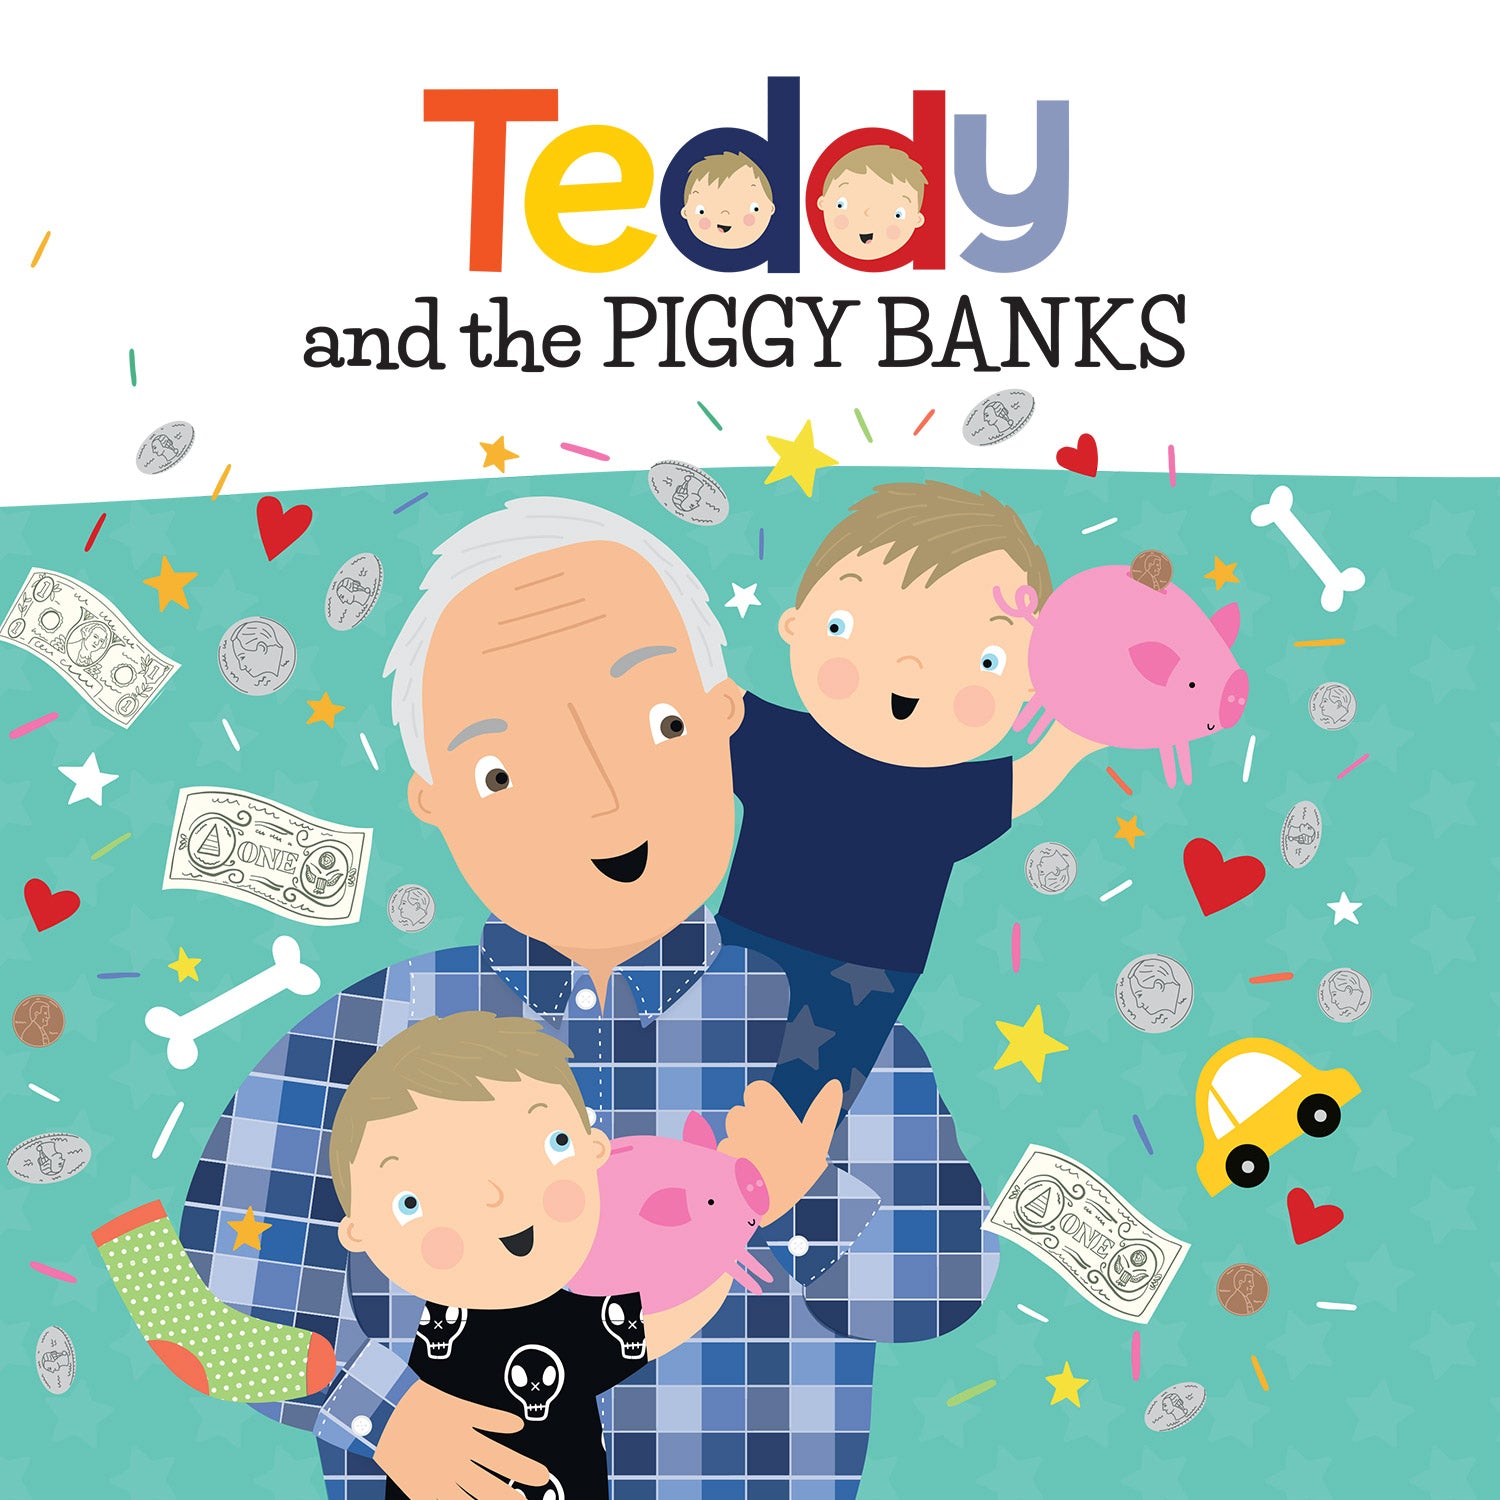 Teddy and the PIGGY BANKS